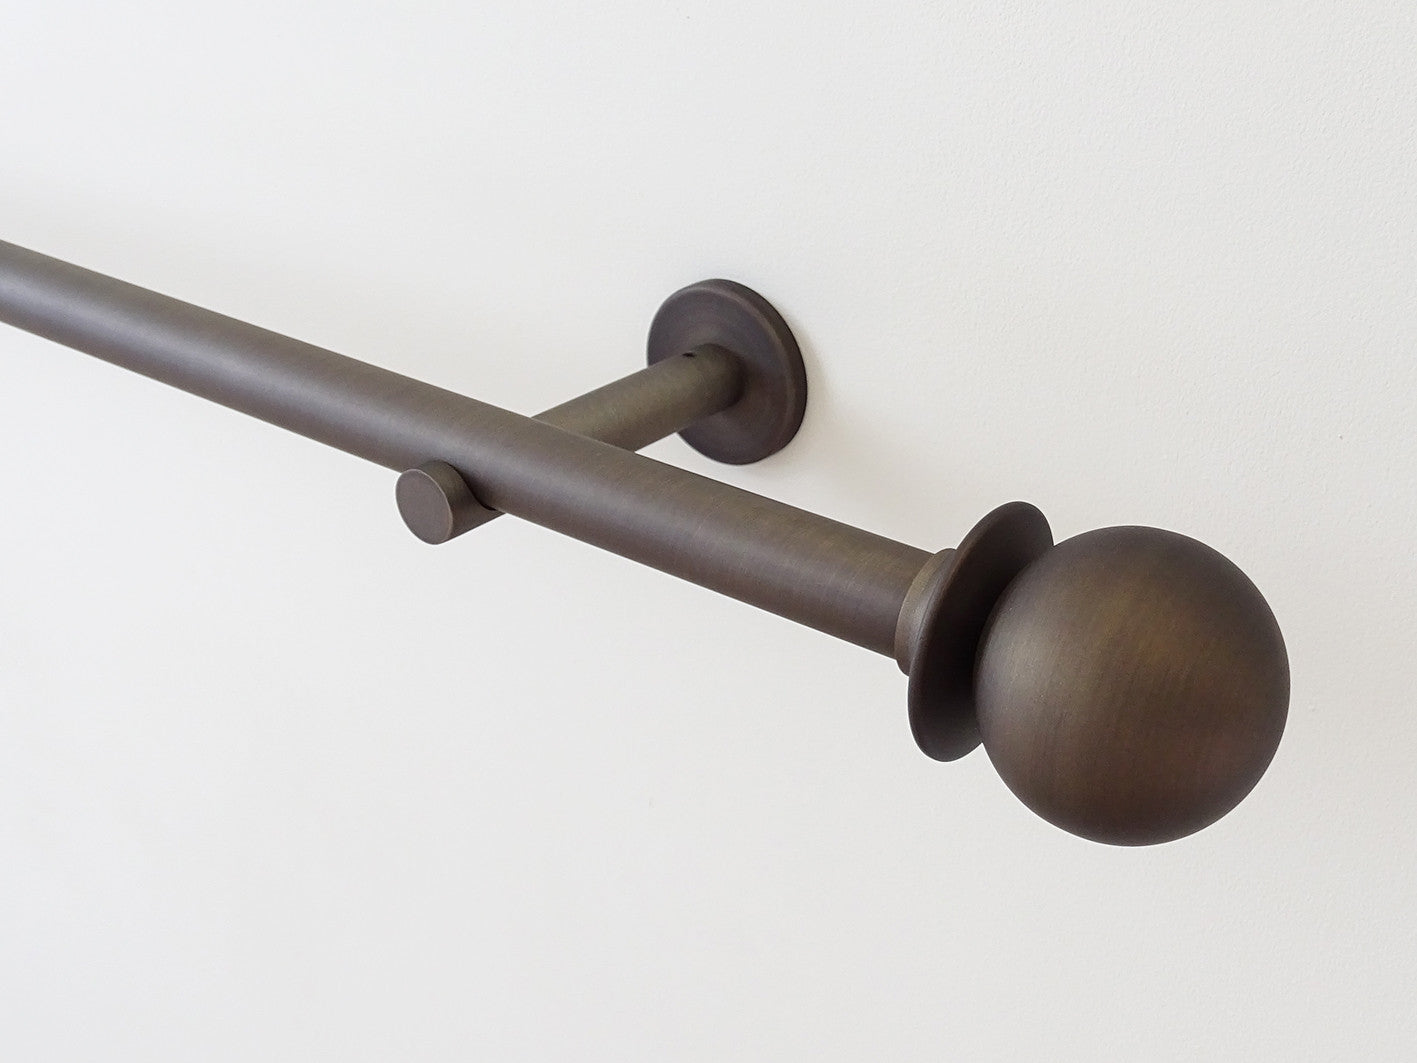 Metal ball finial in brused bronze, mounted on 19mm dia. curtain pole